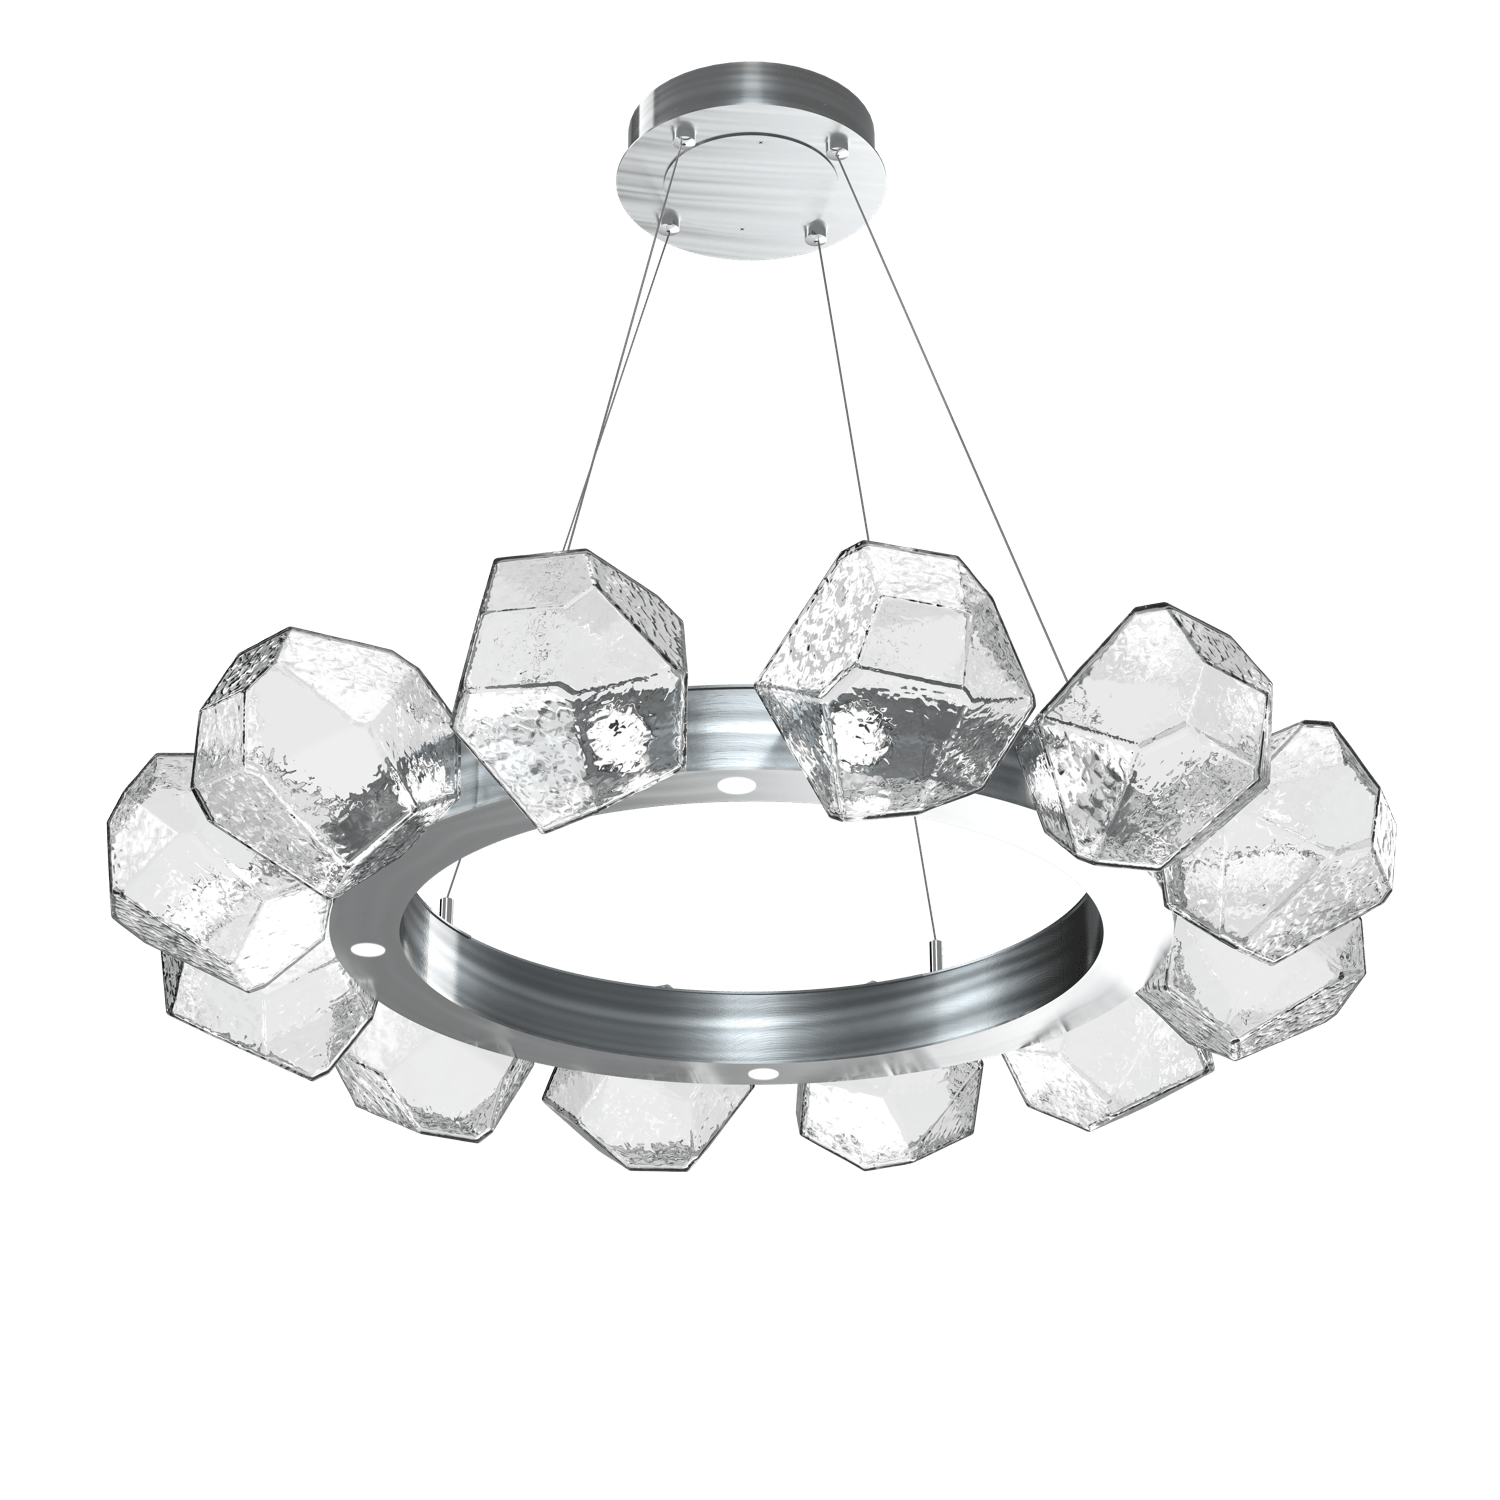 CHB0039-36-SN-C-Hammerton-Studio-Gem-36-inch-radial-ring-chandelier-with-satin-nickel-finish-and-clear-blown-glass-shades-and-LED-lamping